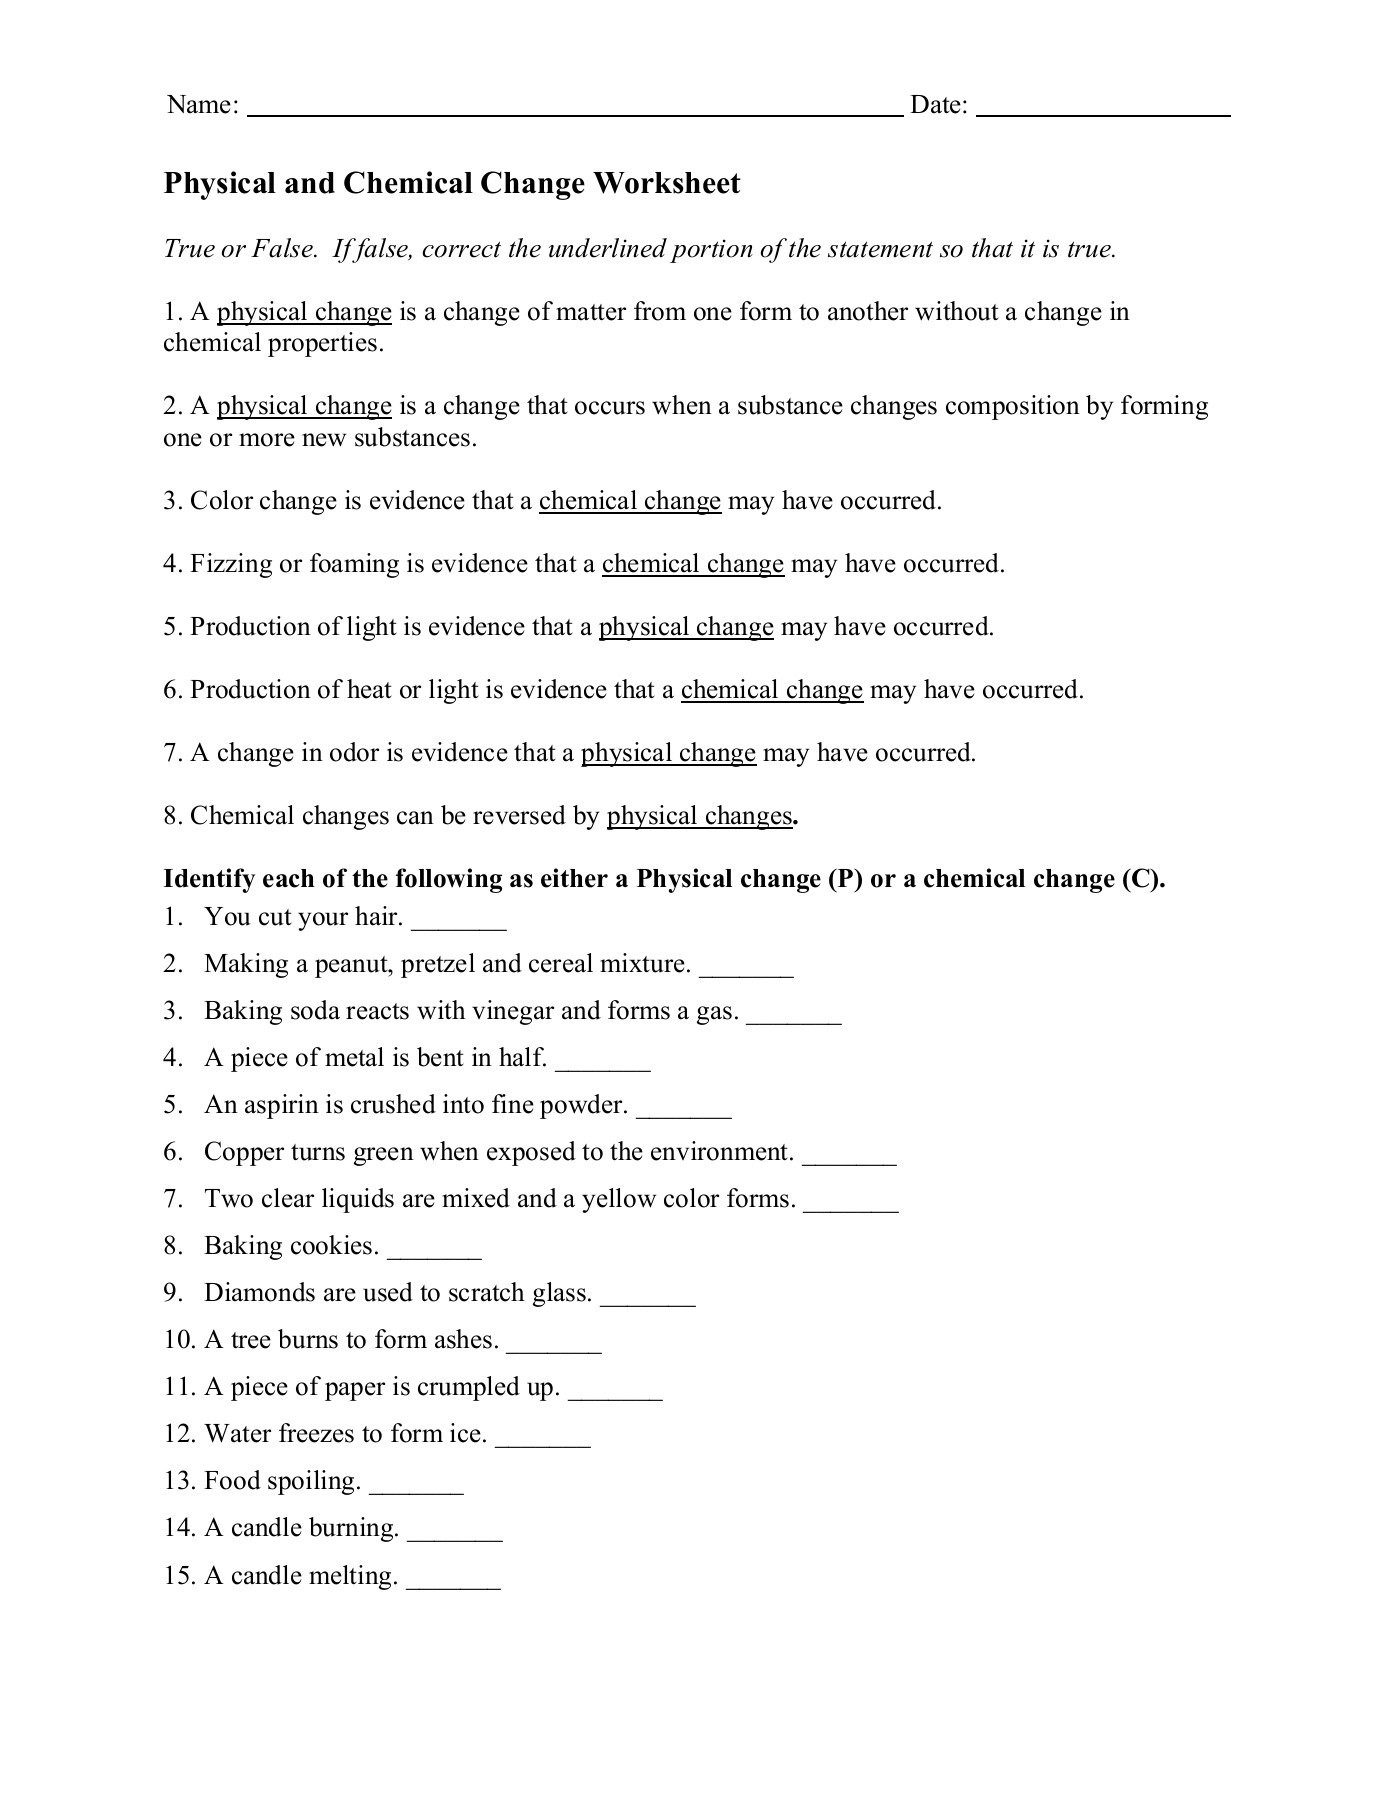 Physical and Chemical Changes Worksheet Physical and Chemical Change Worksheet